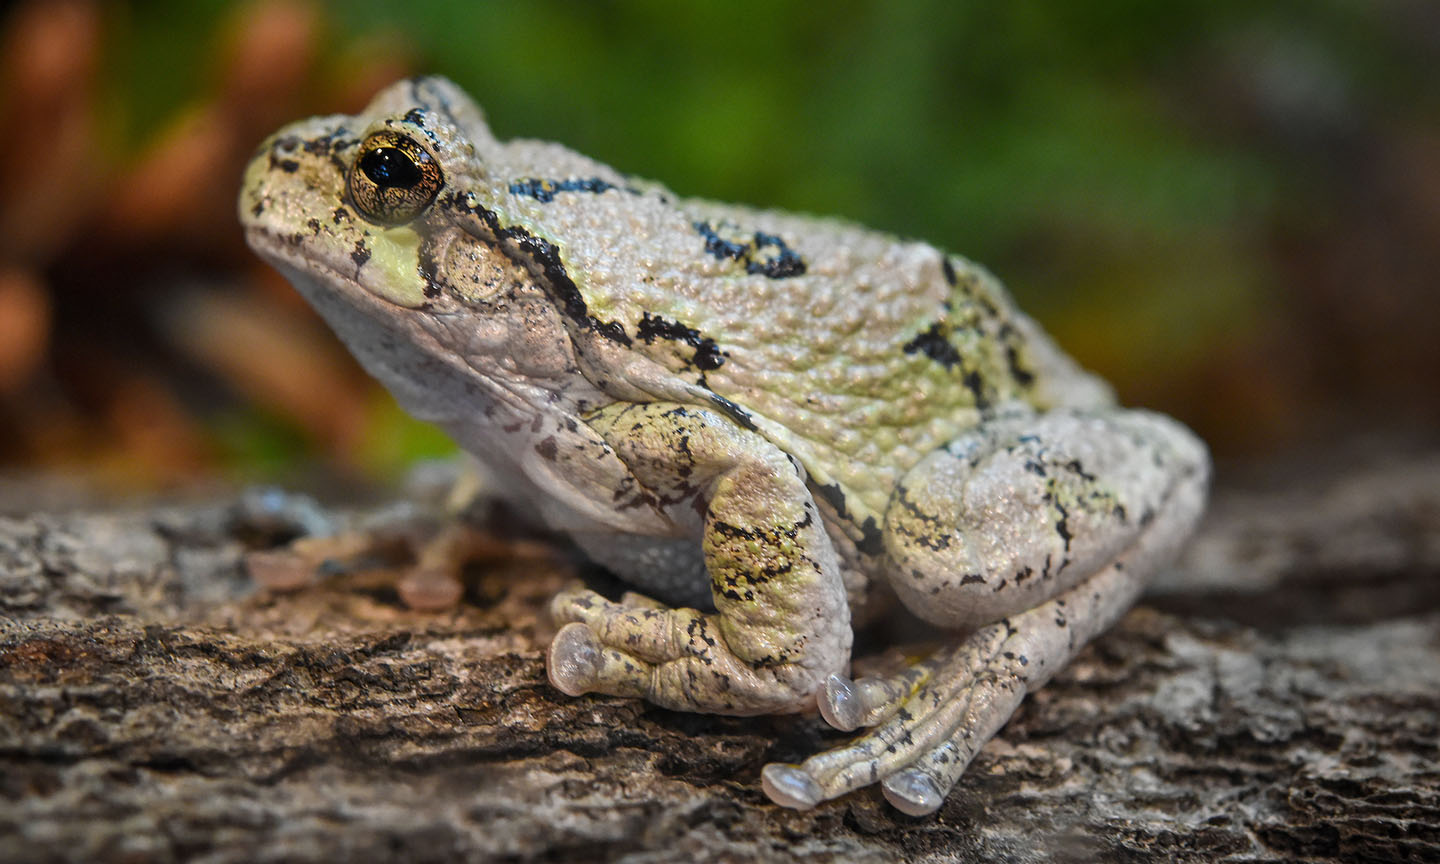 Hear the Sounds of These Amphibians